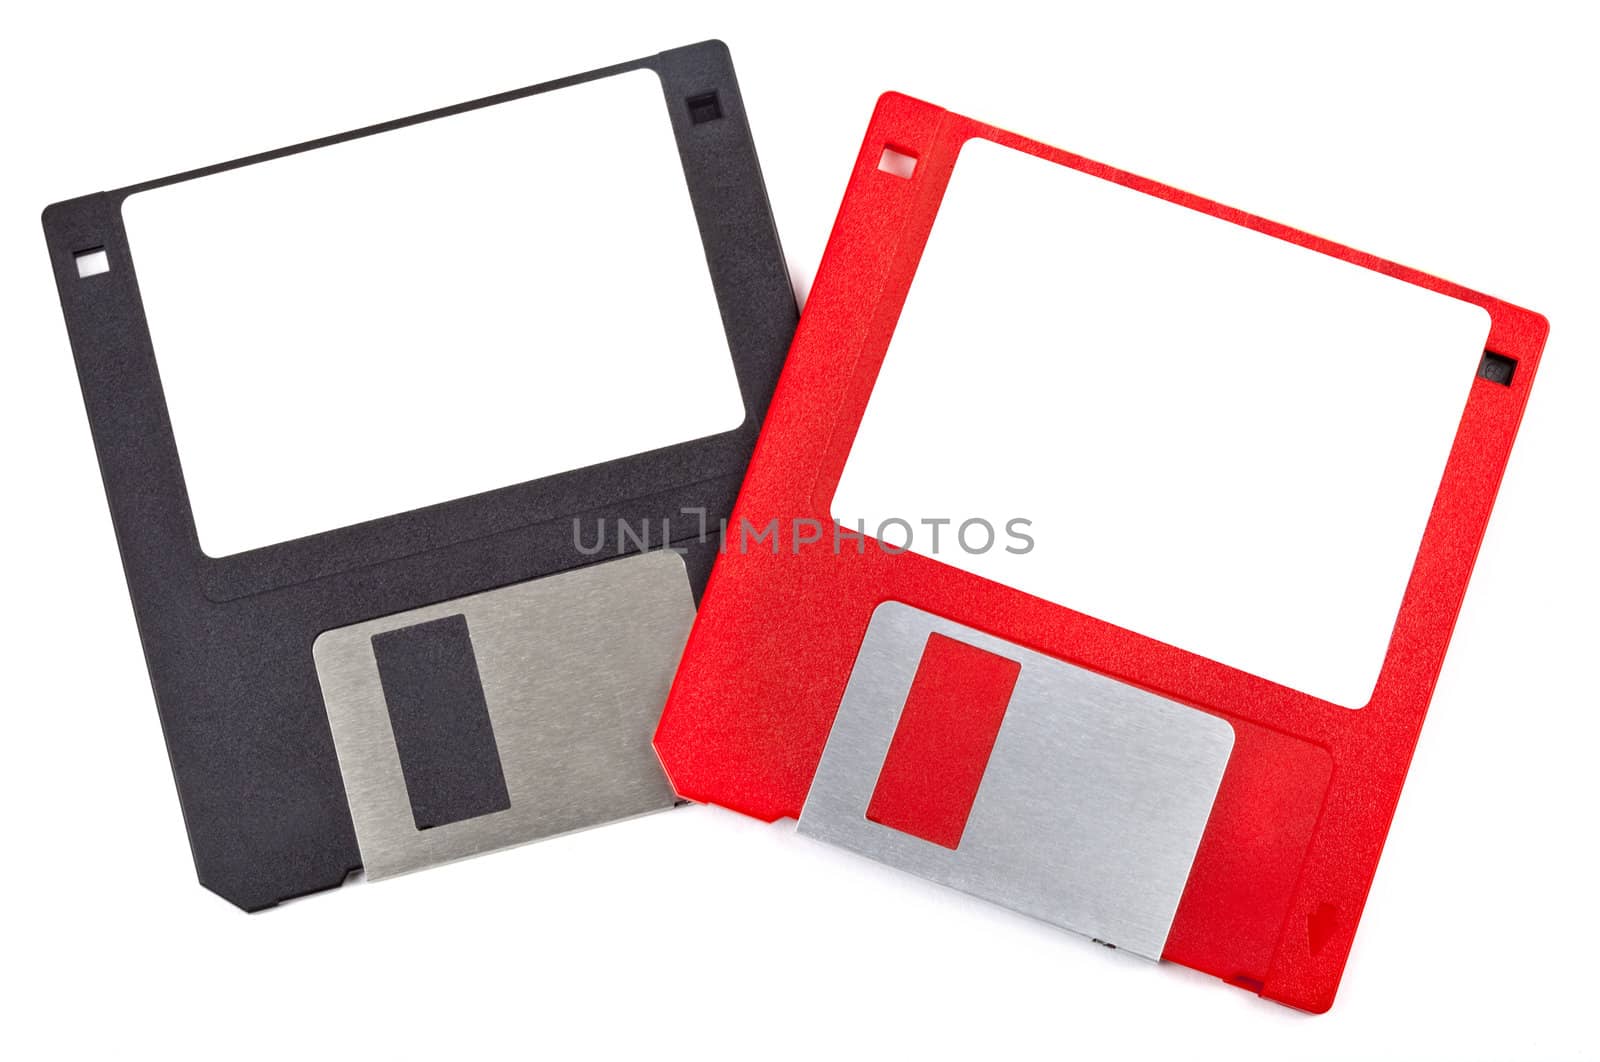 Two Floppy Disks over a white background.